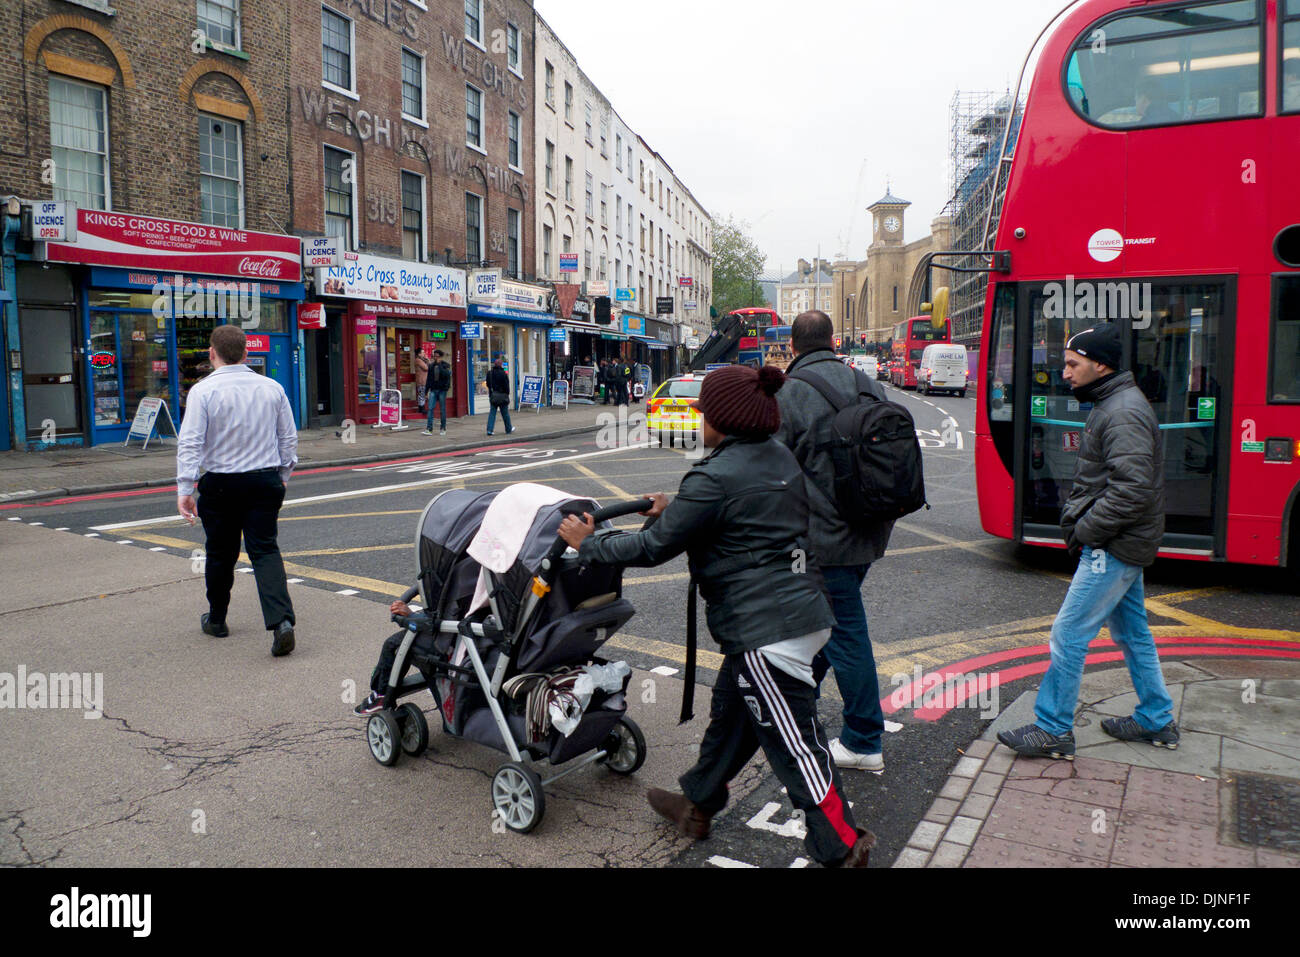 Pedestrians and mother pushing a pram crossing busy city street Grays Inn Road with buses cars traffic in King's Cross area of London UK  KATHY DEWITT Stock Photo